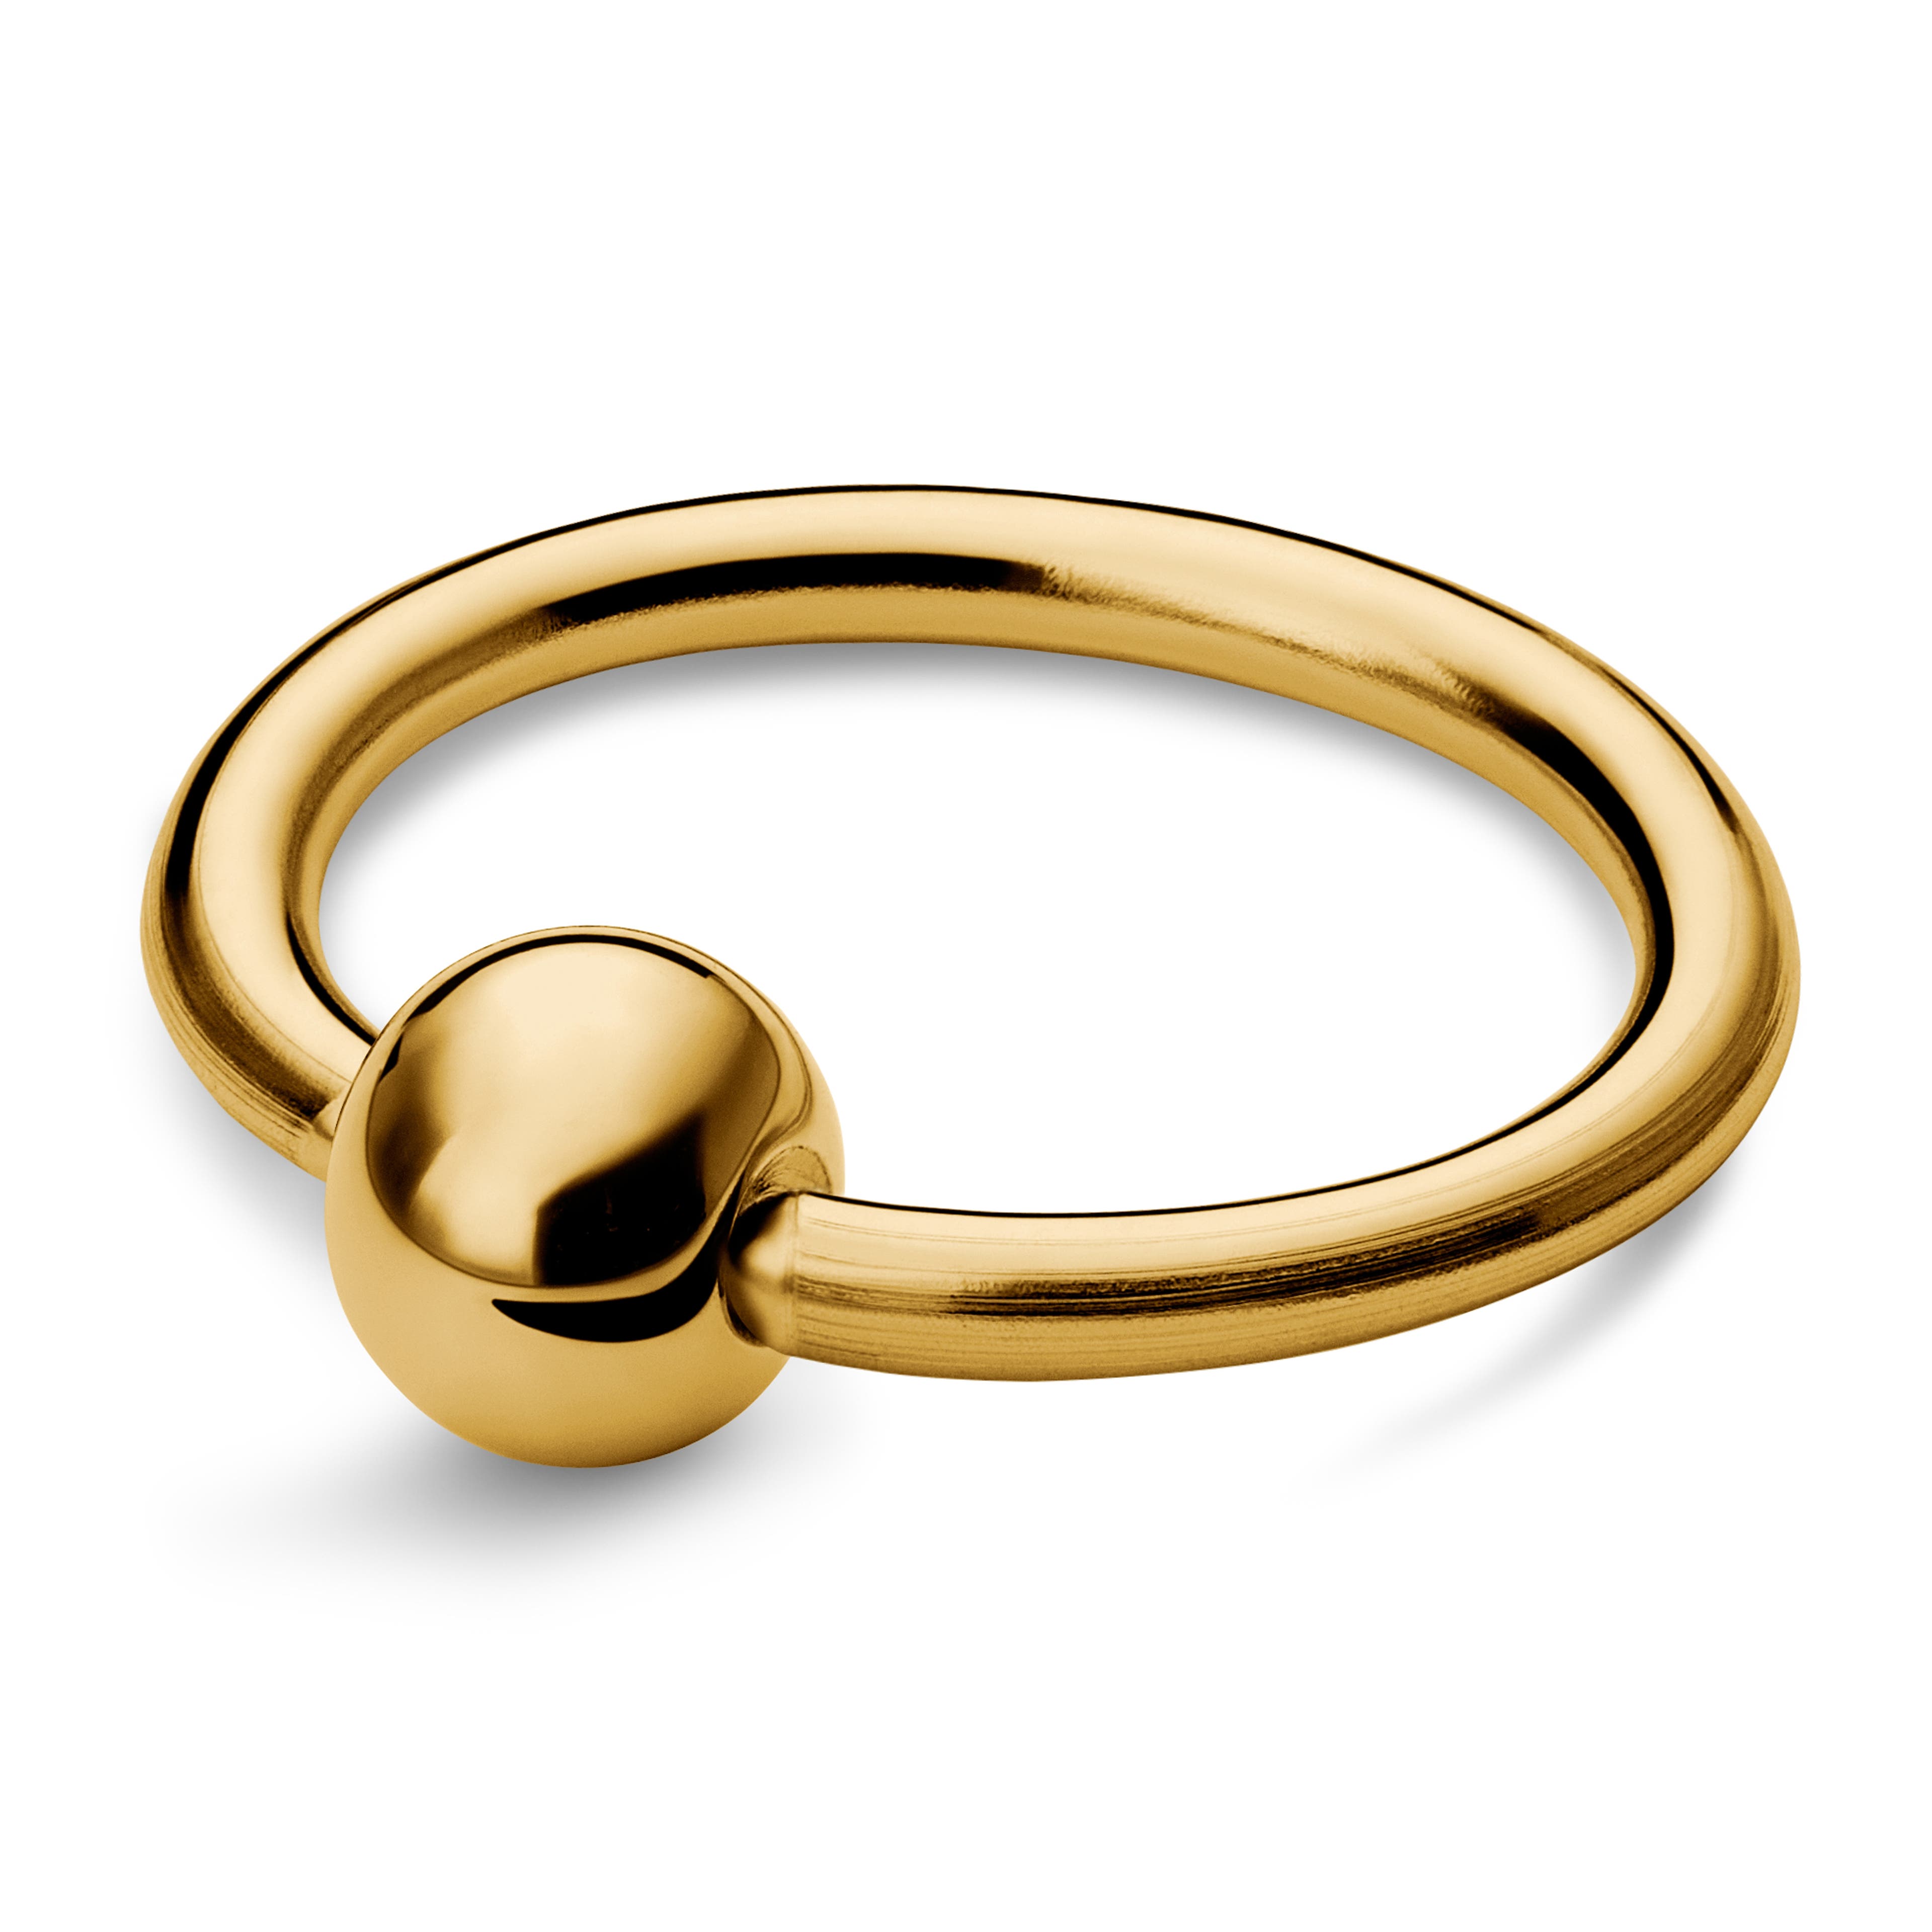 3/8" (10 mm) Gold-Tone Surgical Steel Captive Bead Ring